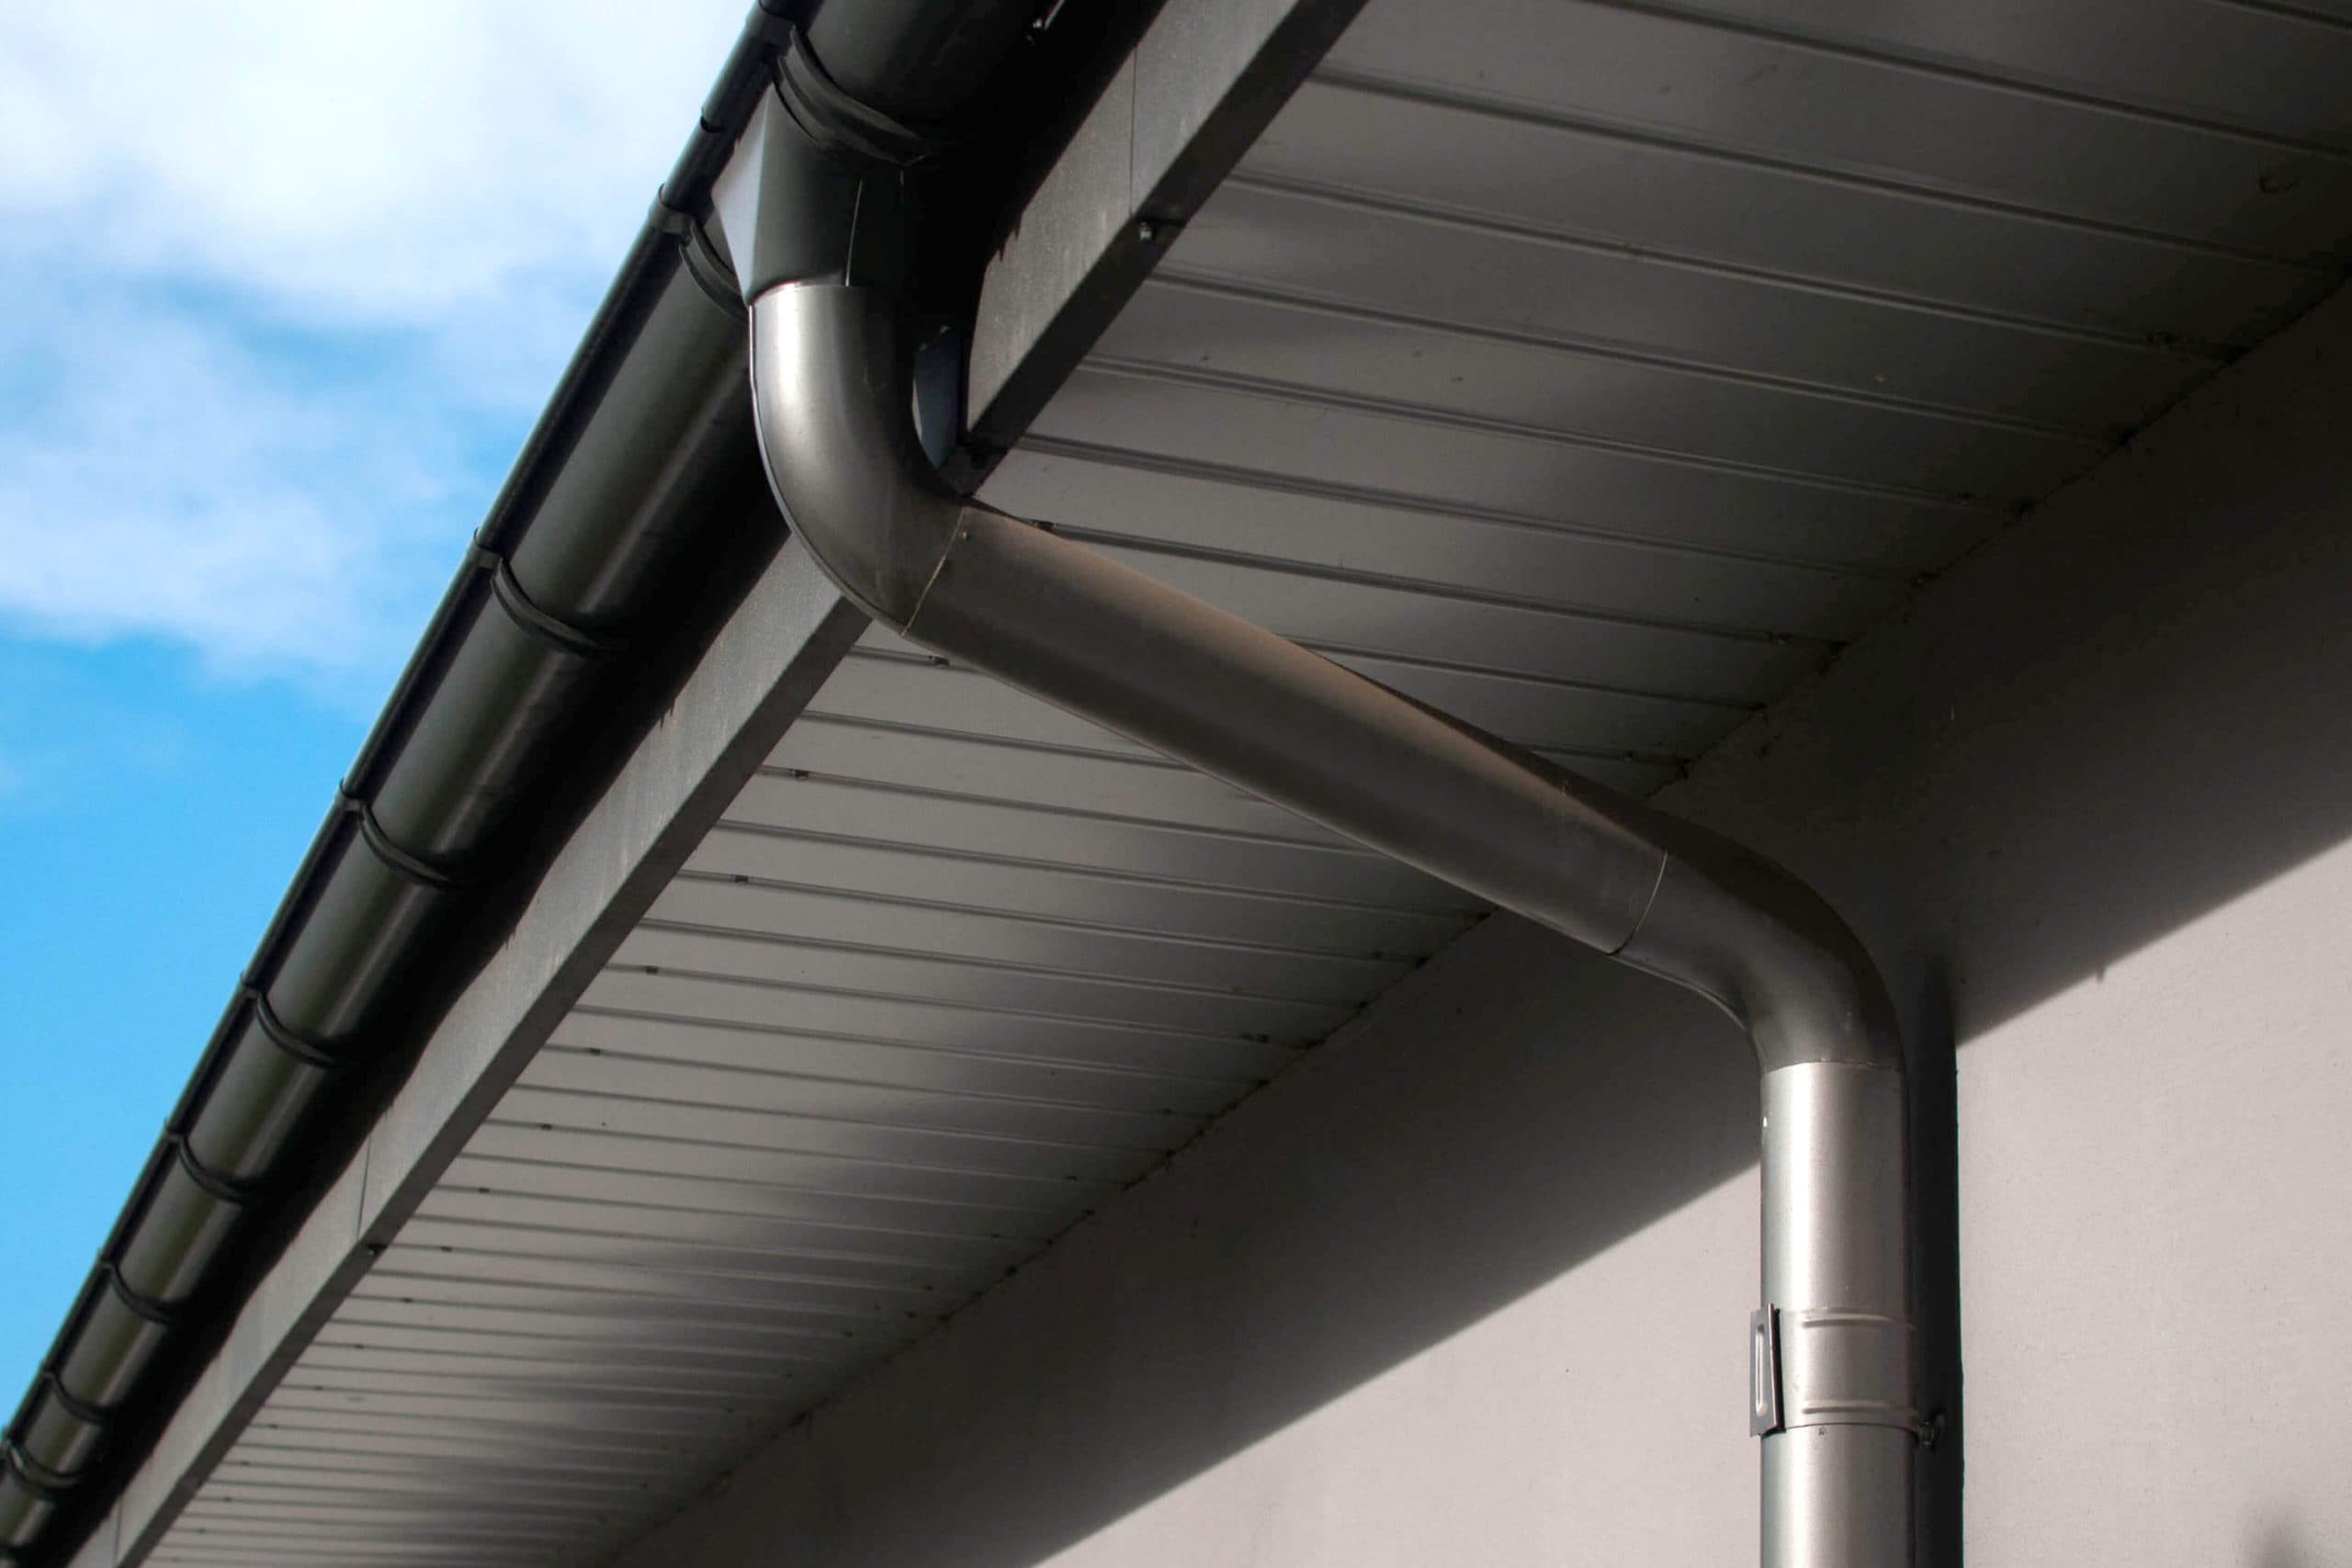 Reliable and affordable Galvanized gutters installation in Macon